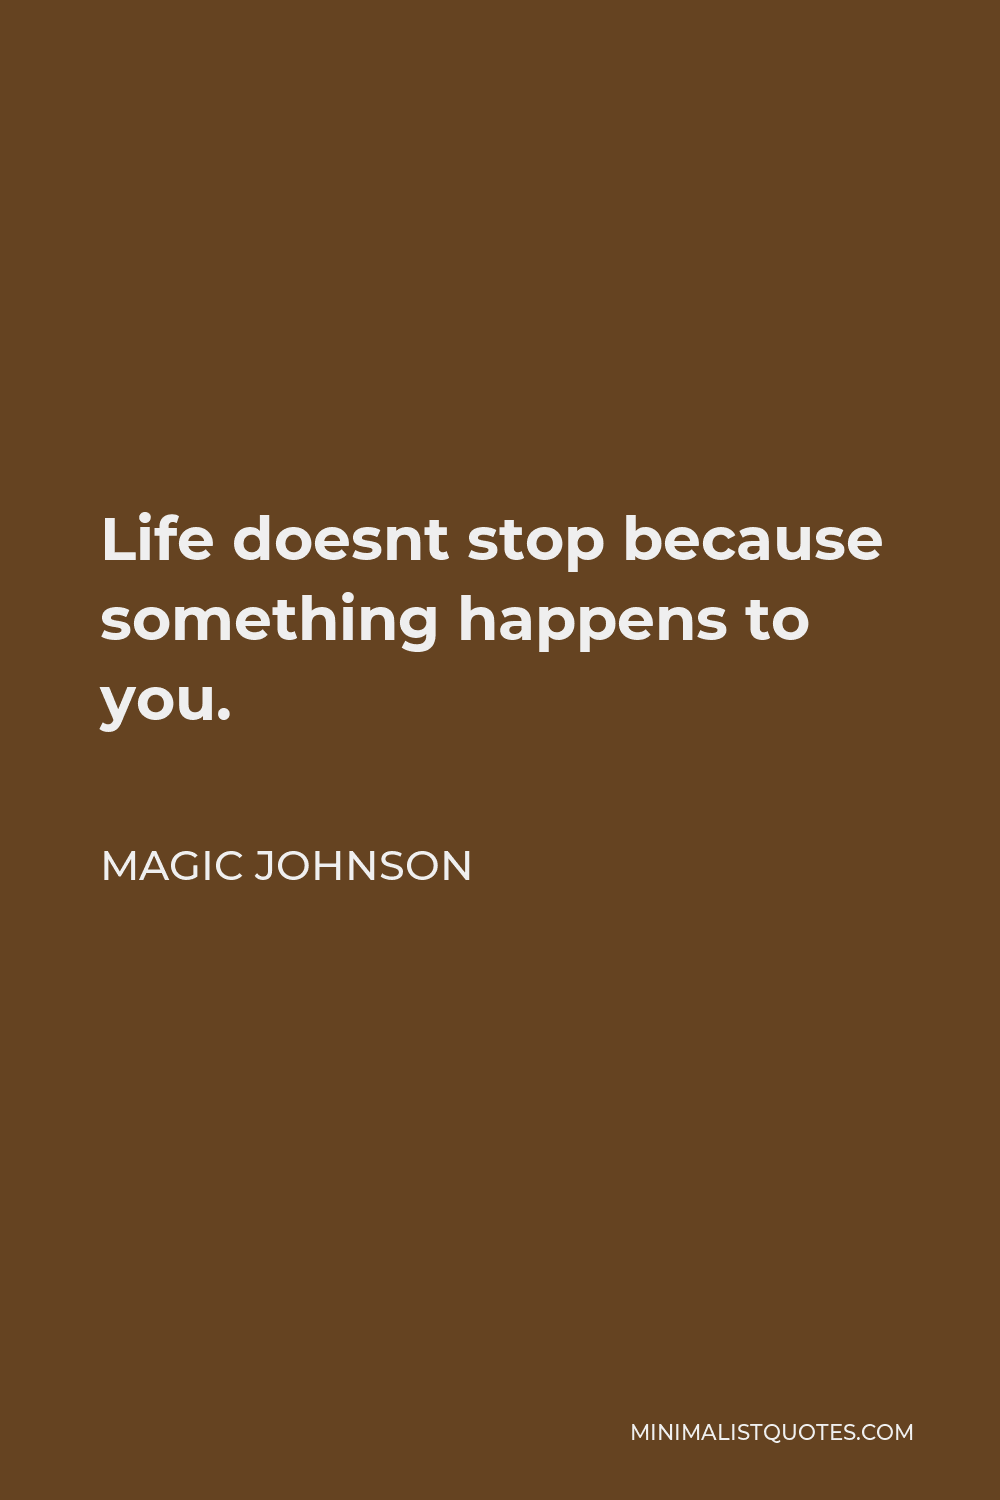 Magic Johnson Quote - Life doesnt stop because something happens to you.